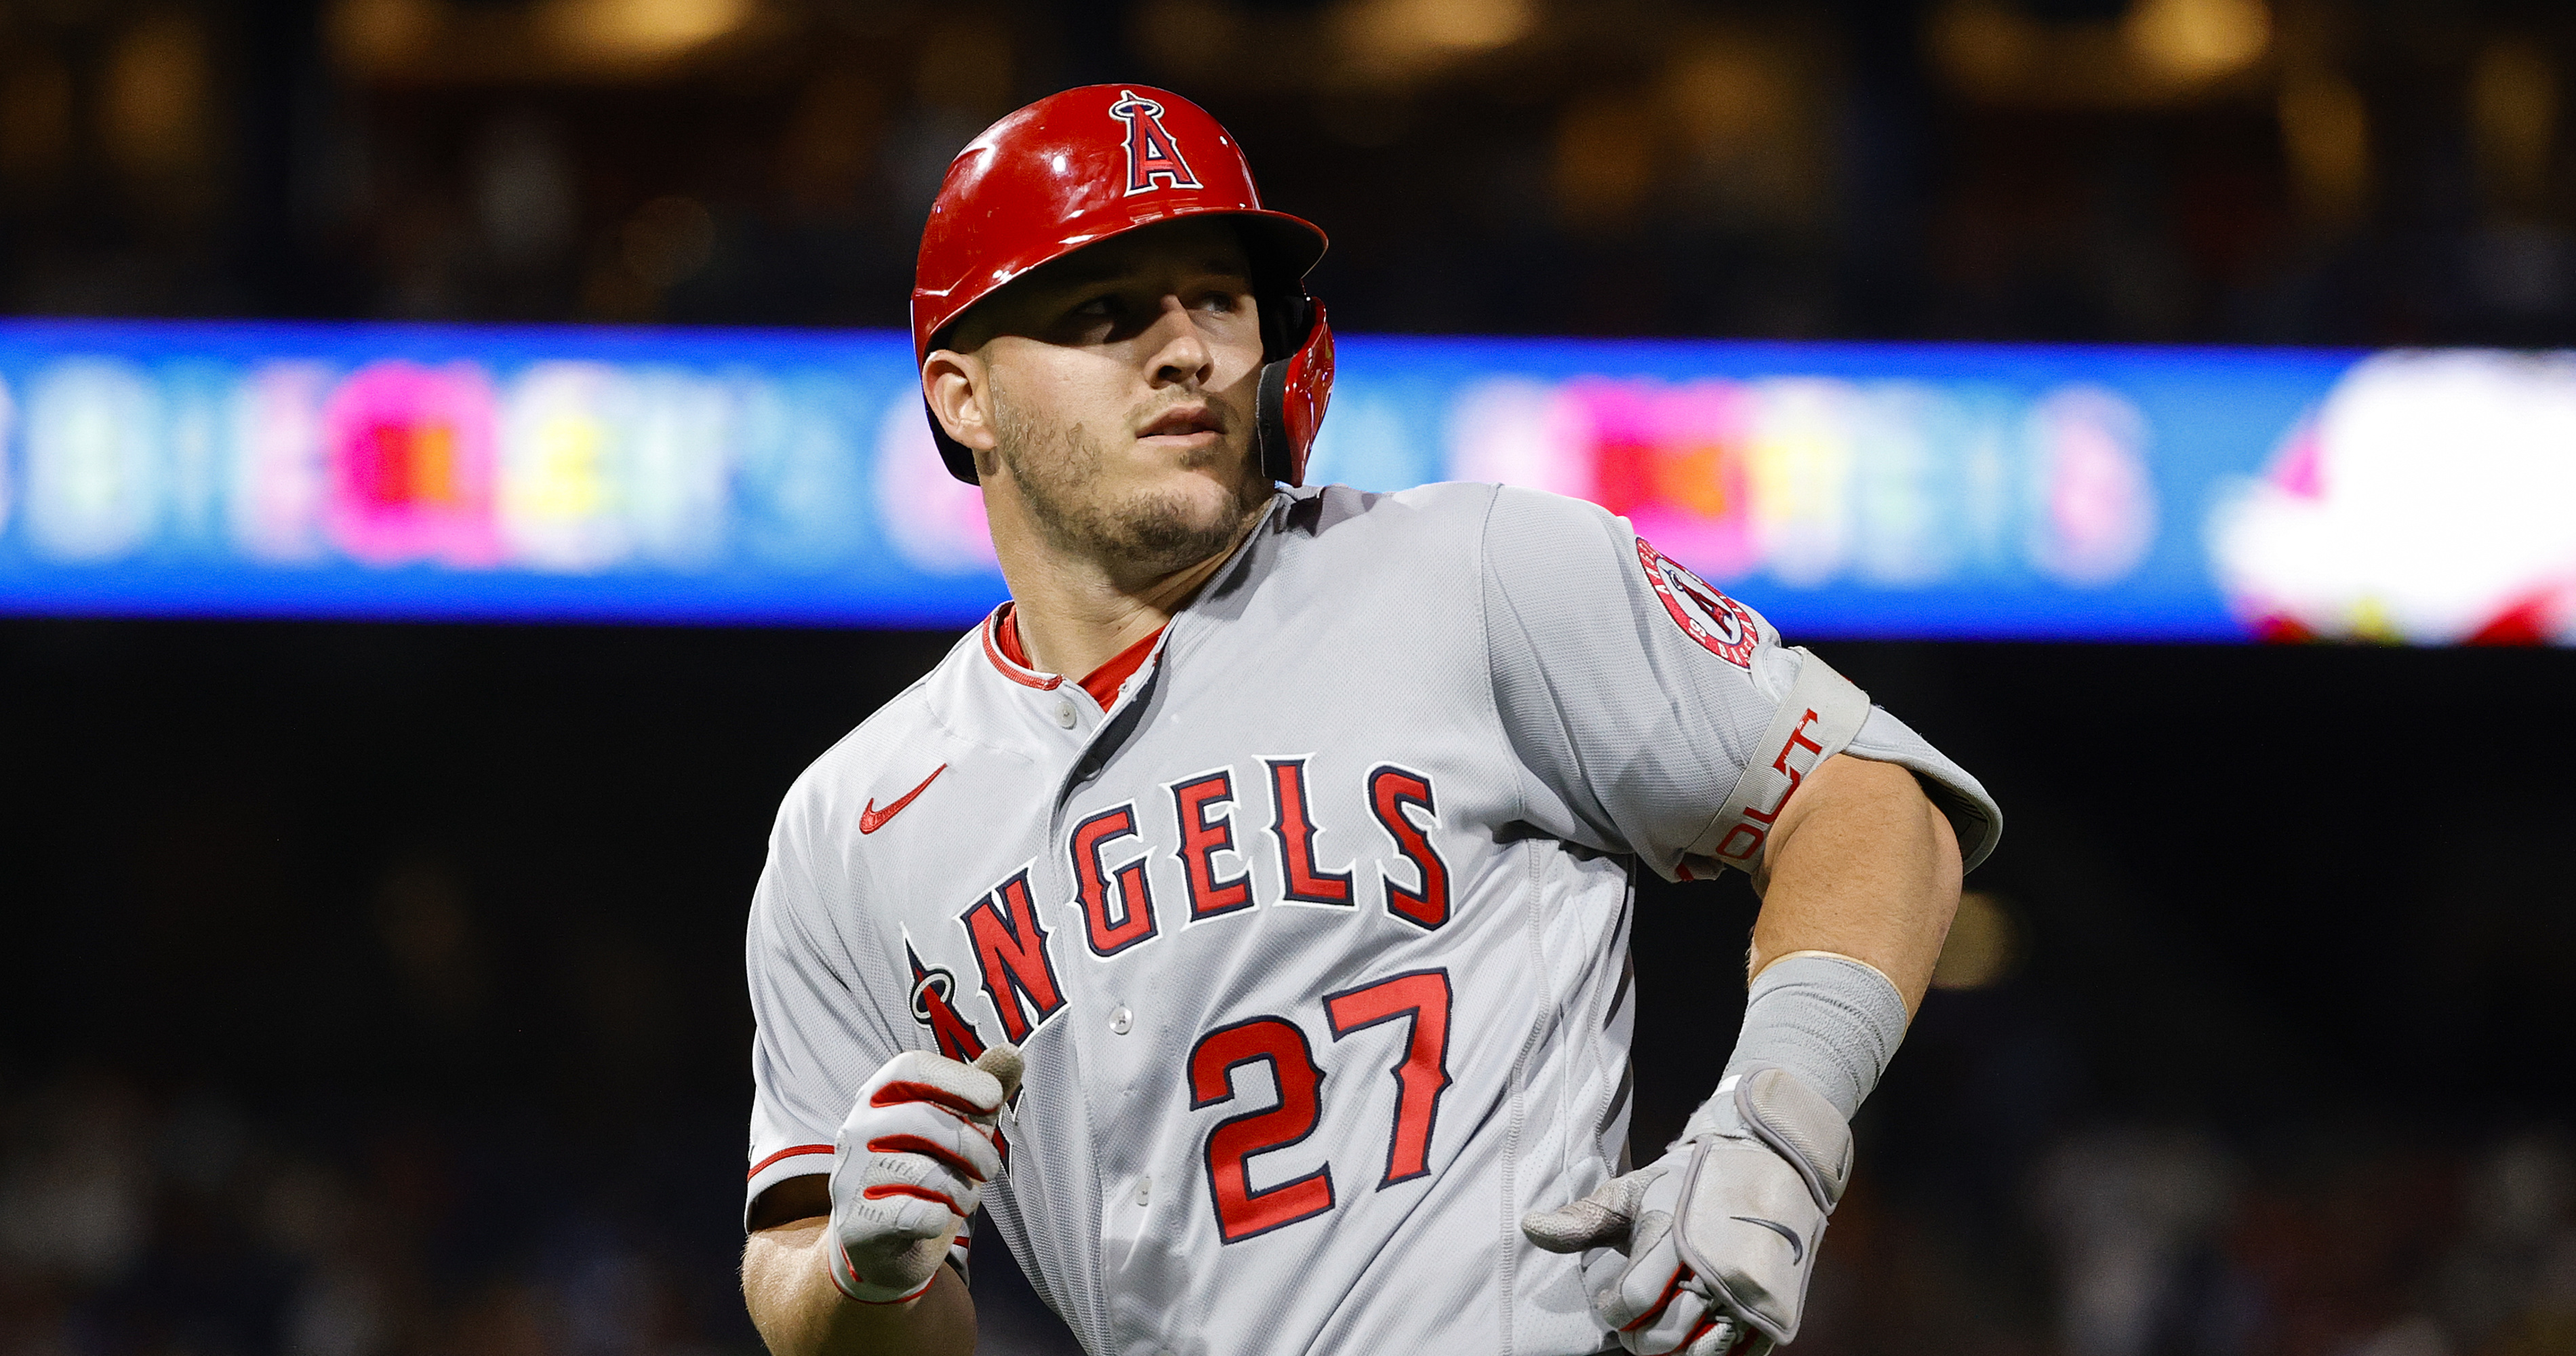 Angels' Mike Trout wins ninth Silver Slugger award - Los Angeles Times